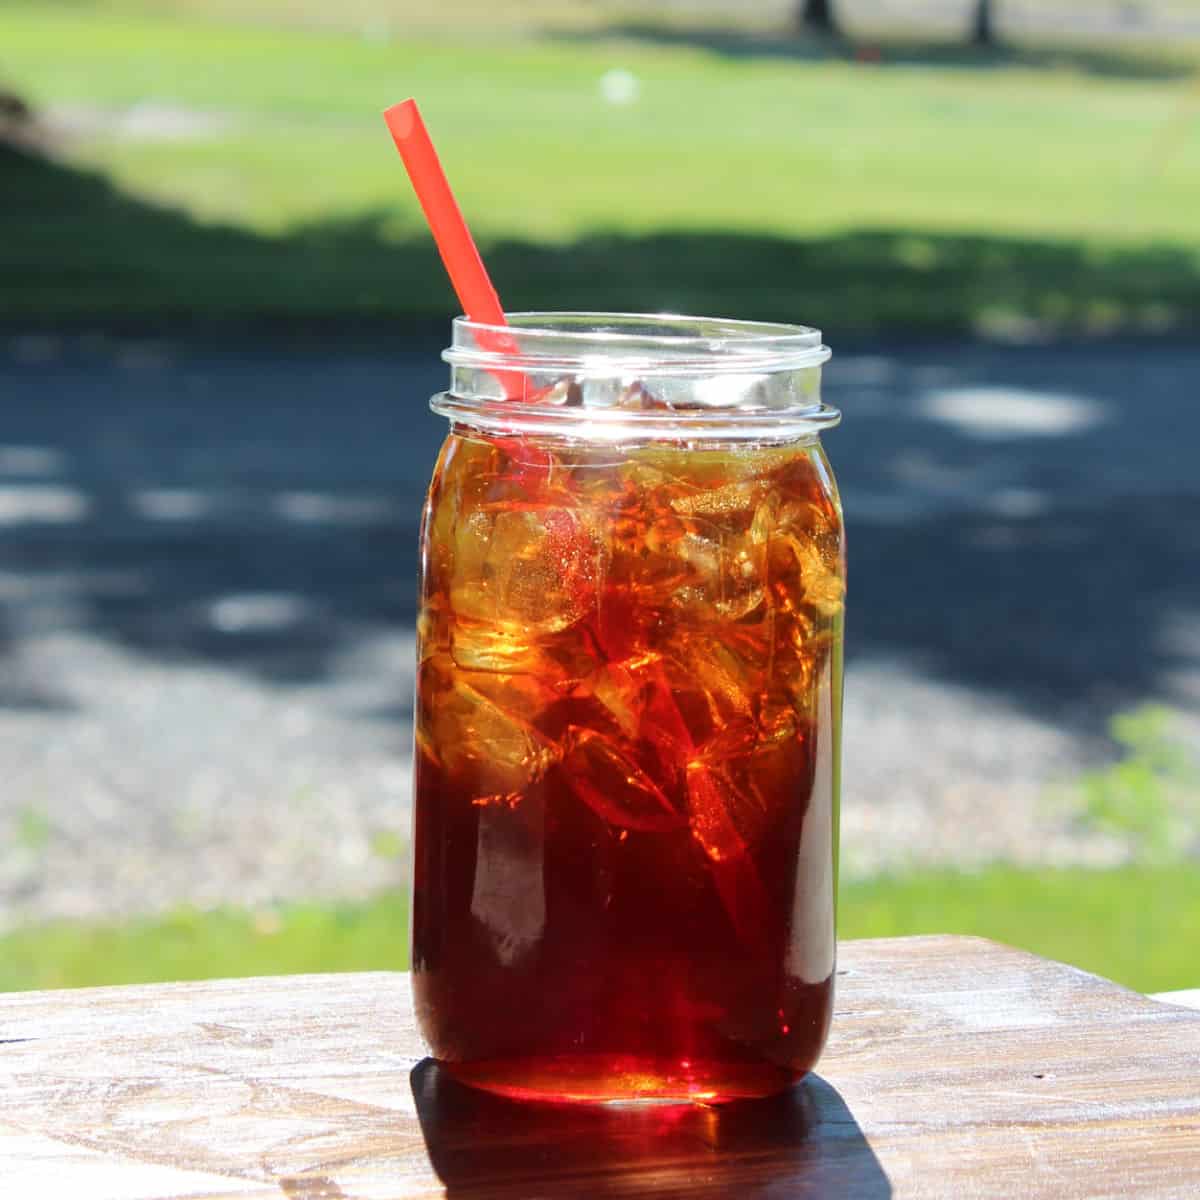 Share how you do your iced tea. For me, I just brew the tea well